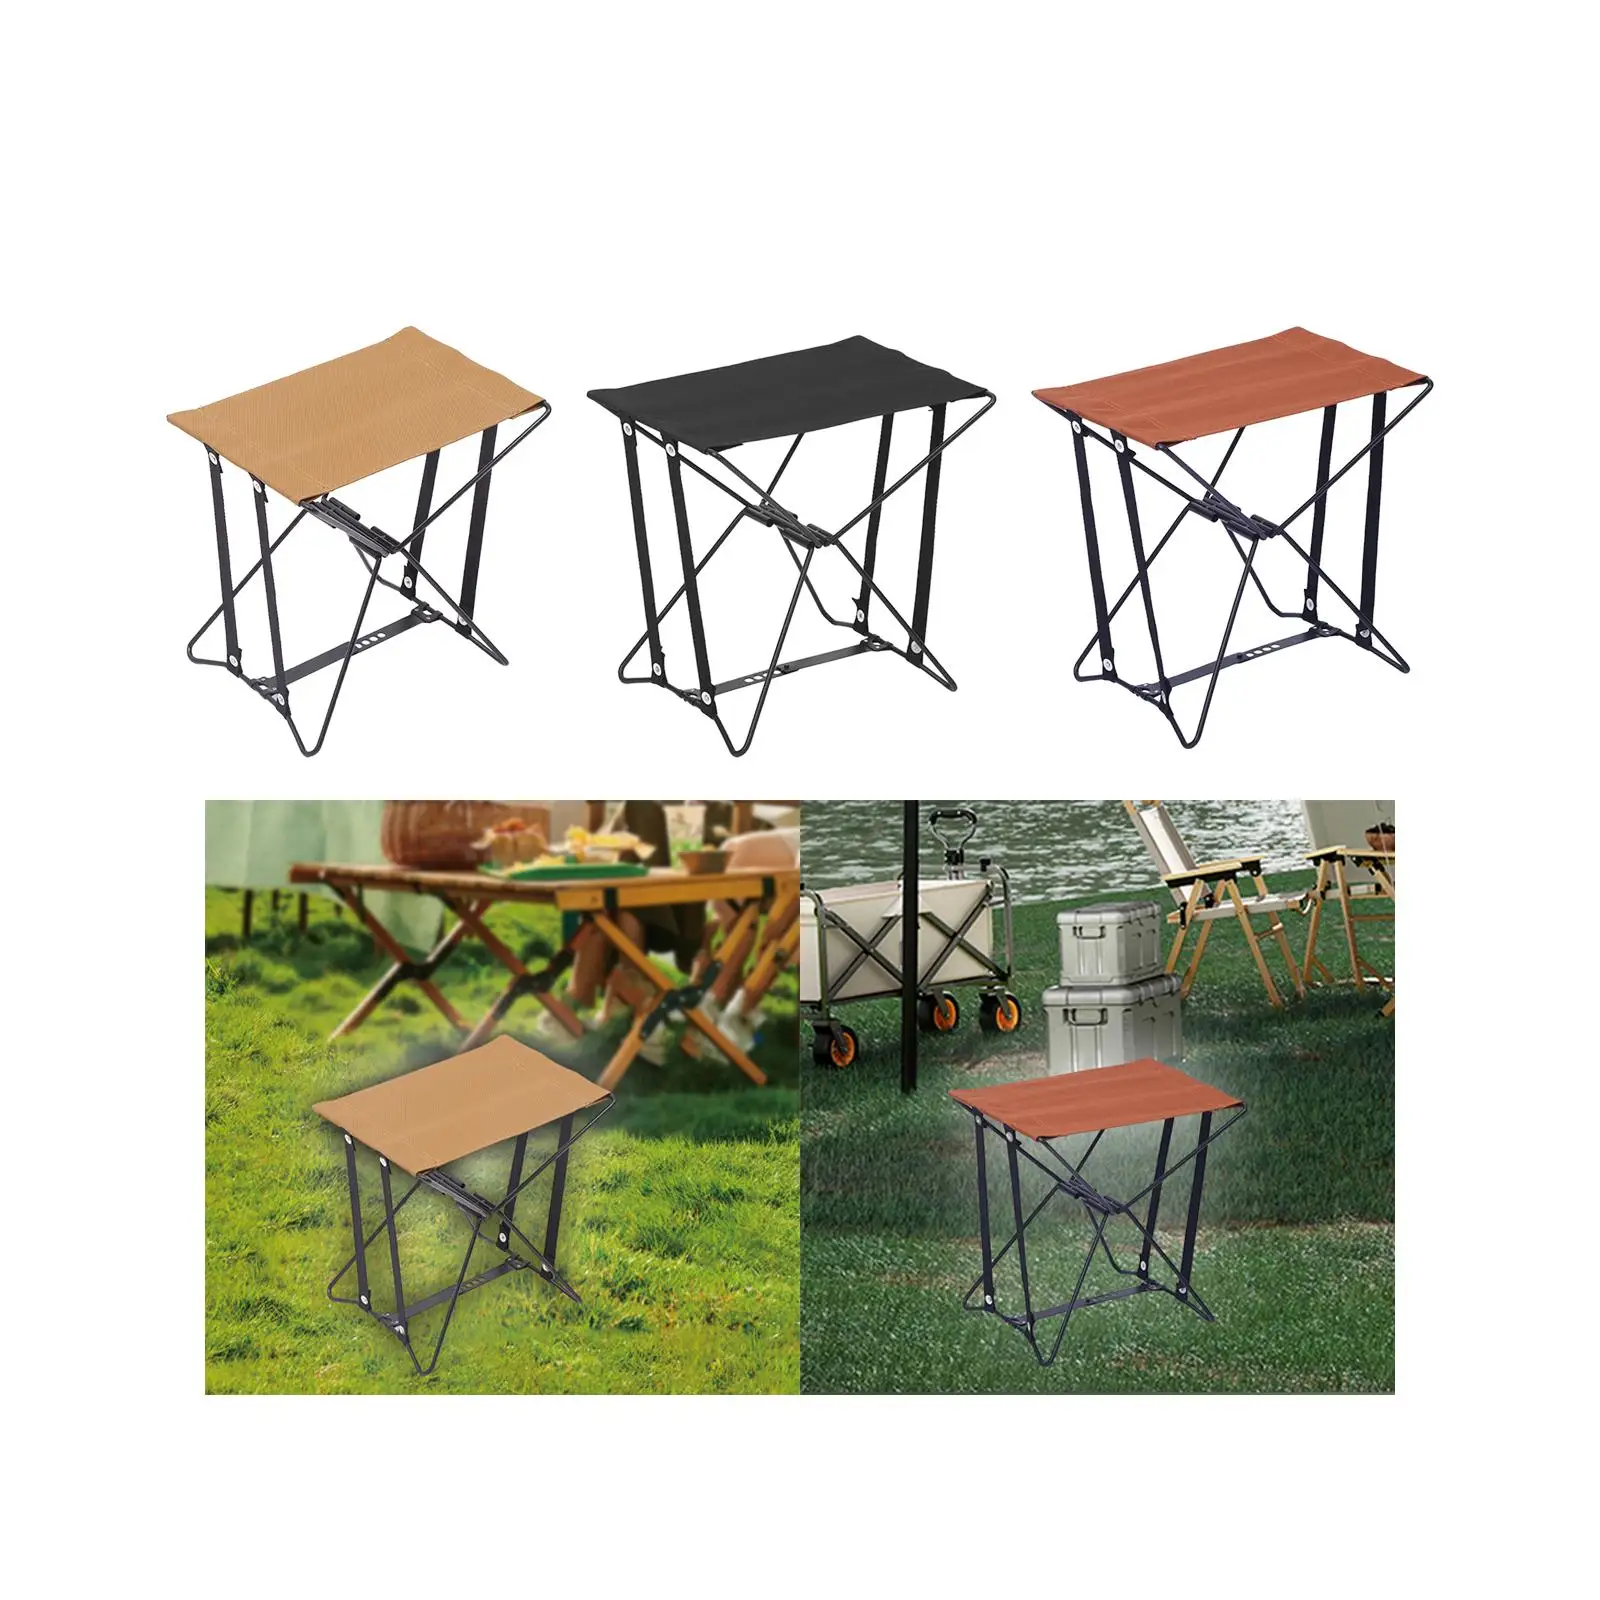 Camping Stool Portable Folding Stool Small Foot Stool Foldable Footstool Saddle Chair for Barbecue Traveling Hiking BBQ Lawn